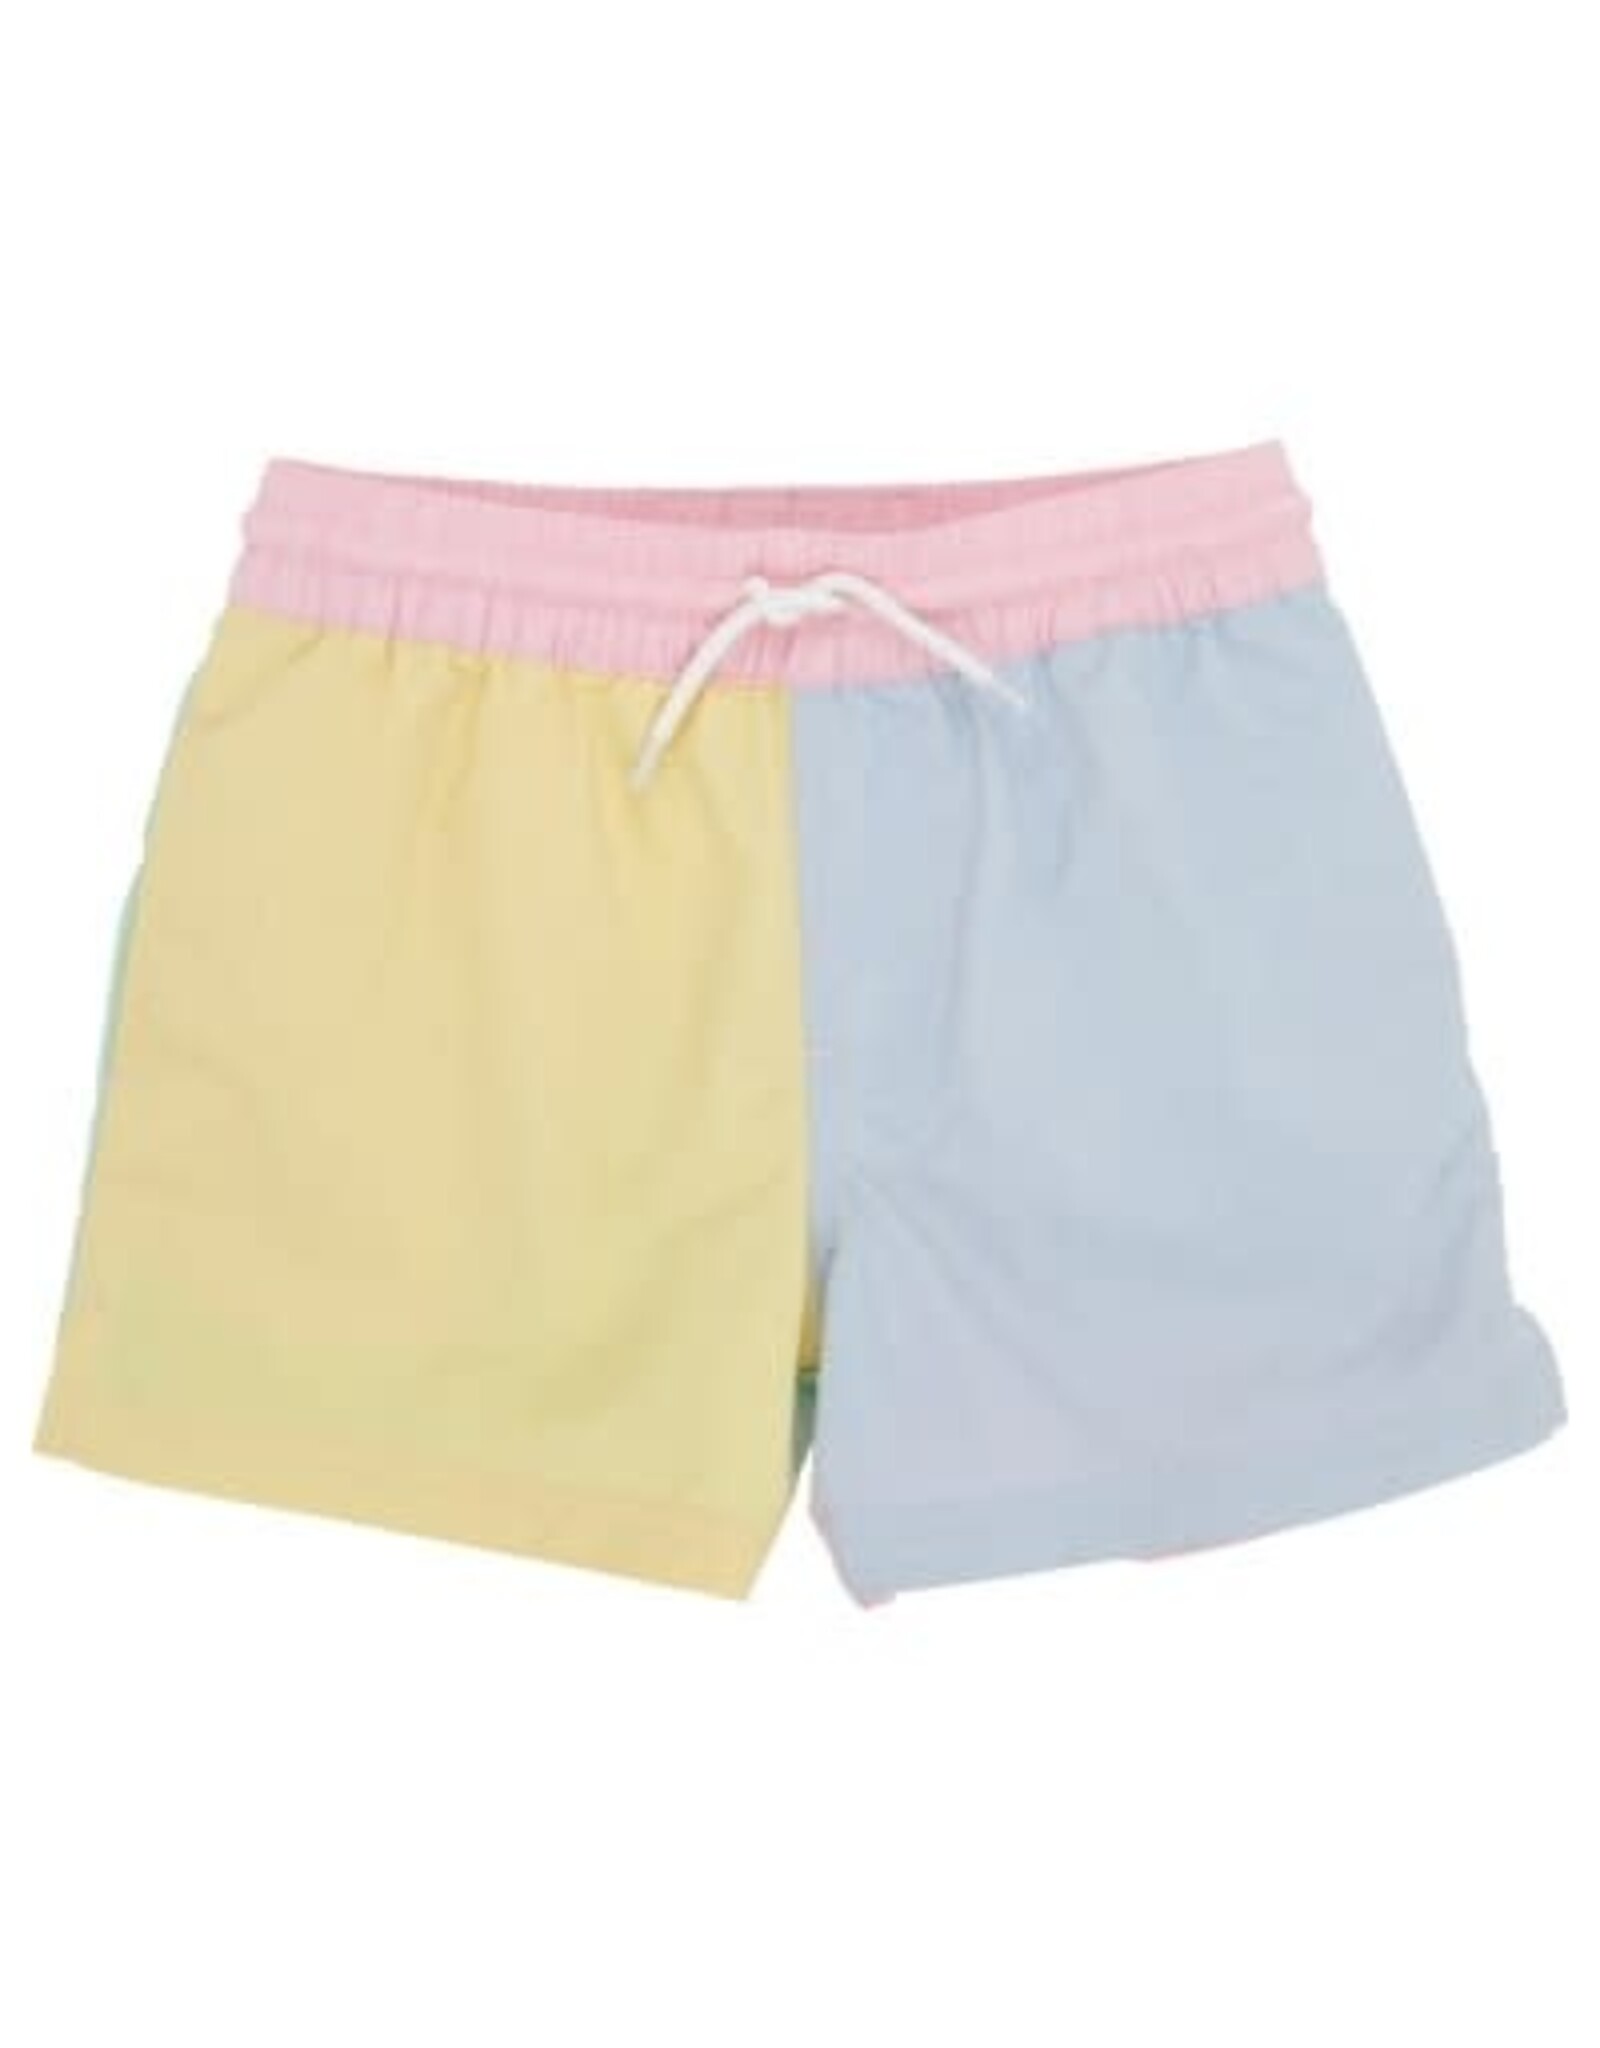 The Beaufort Bonnet Company Country Club Colorblock Trunk- Yellow, Pink, Blue, Seafoam